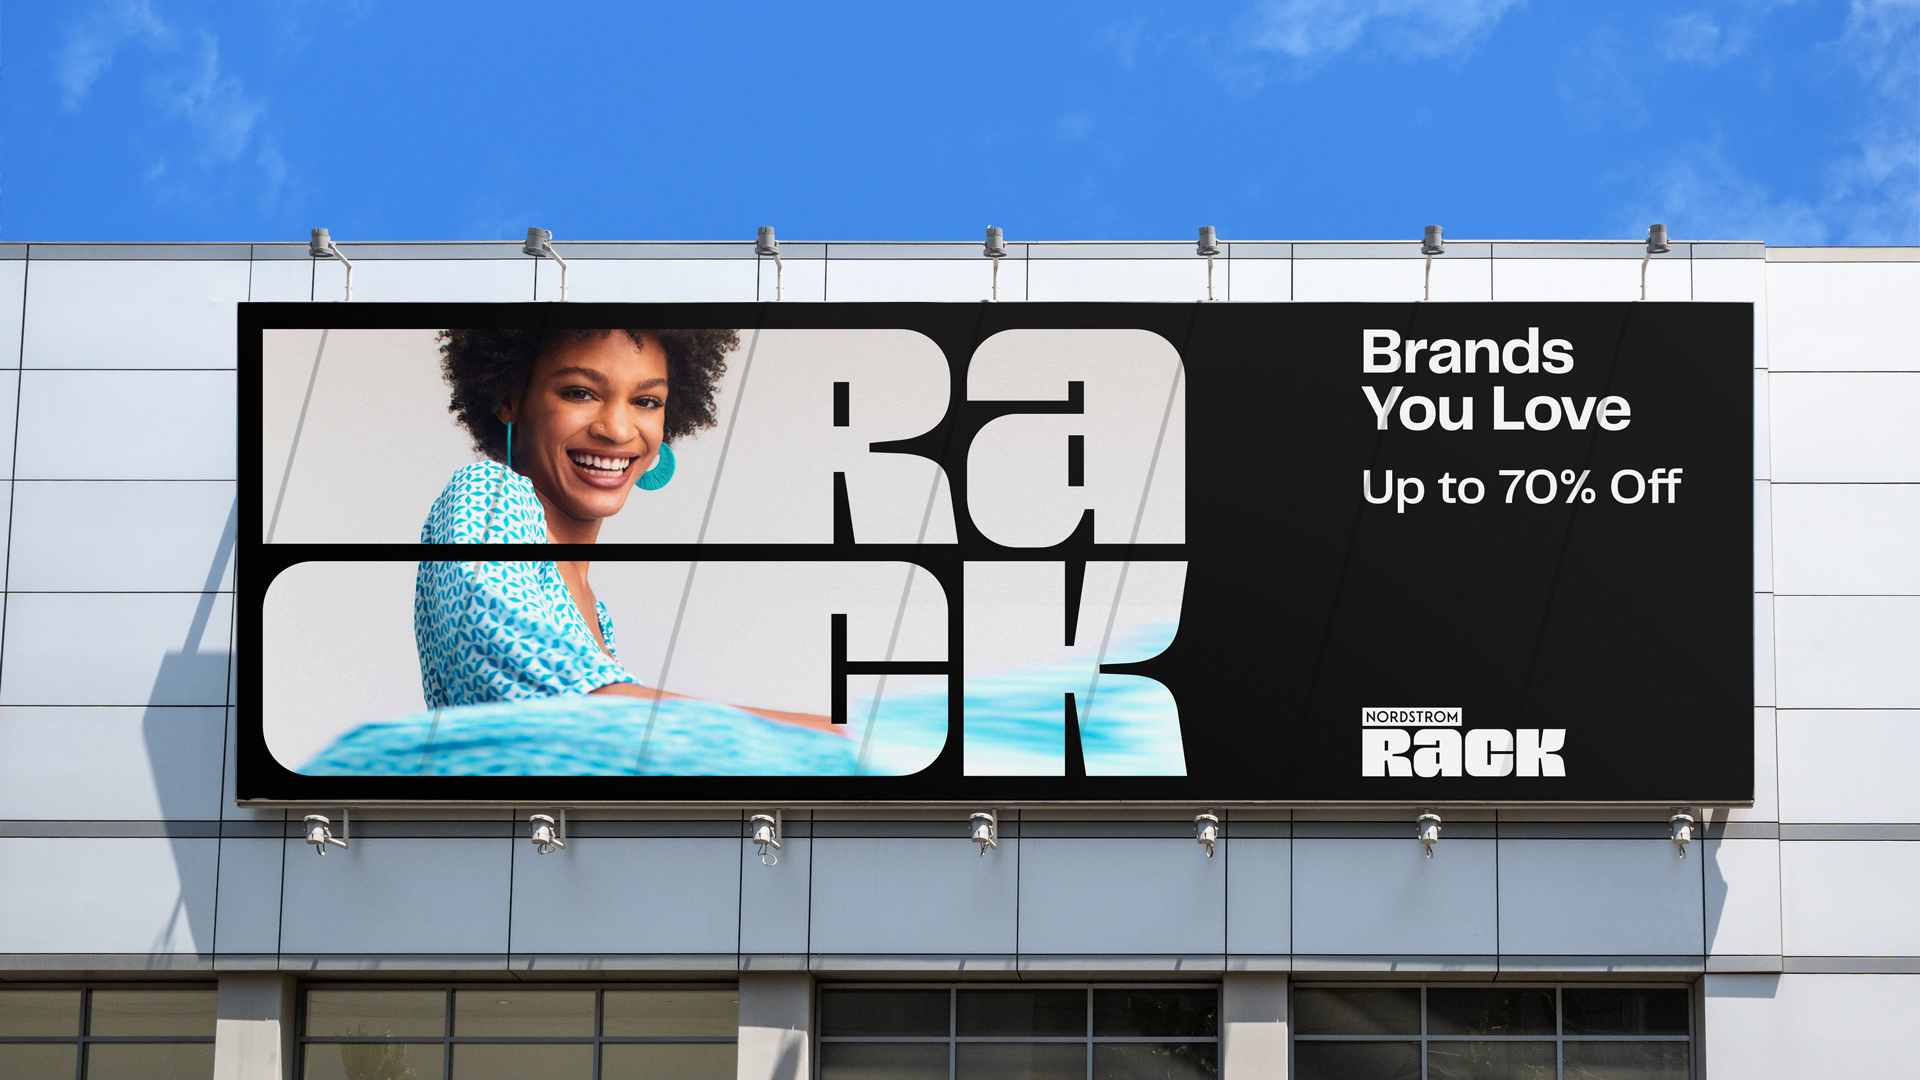 Nordstrom Rack billboard with fashion photography and modular logo.